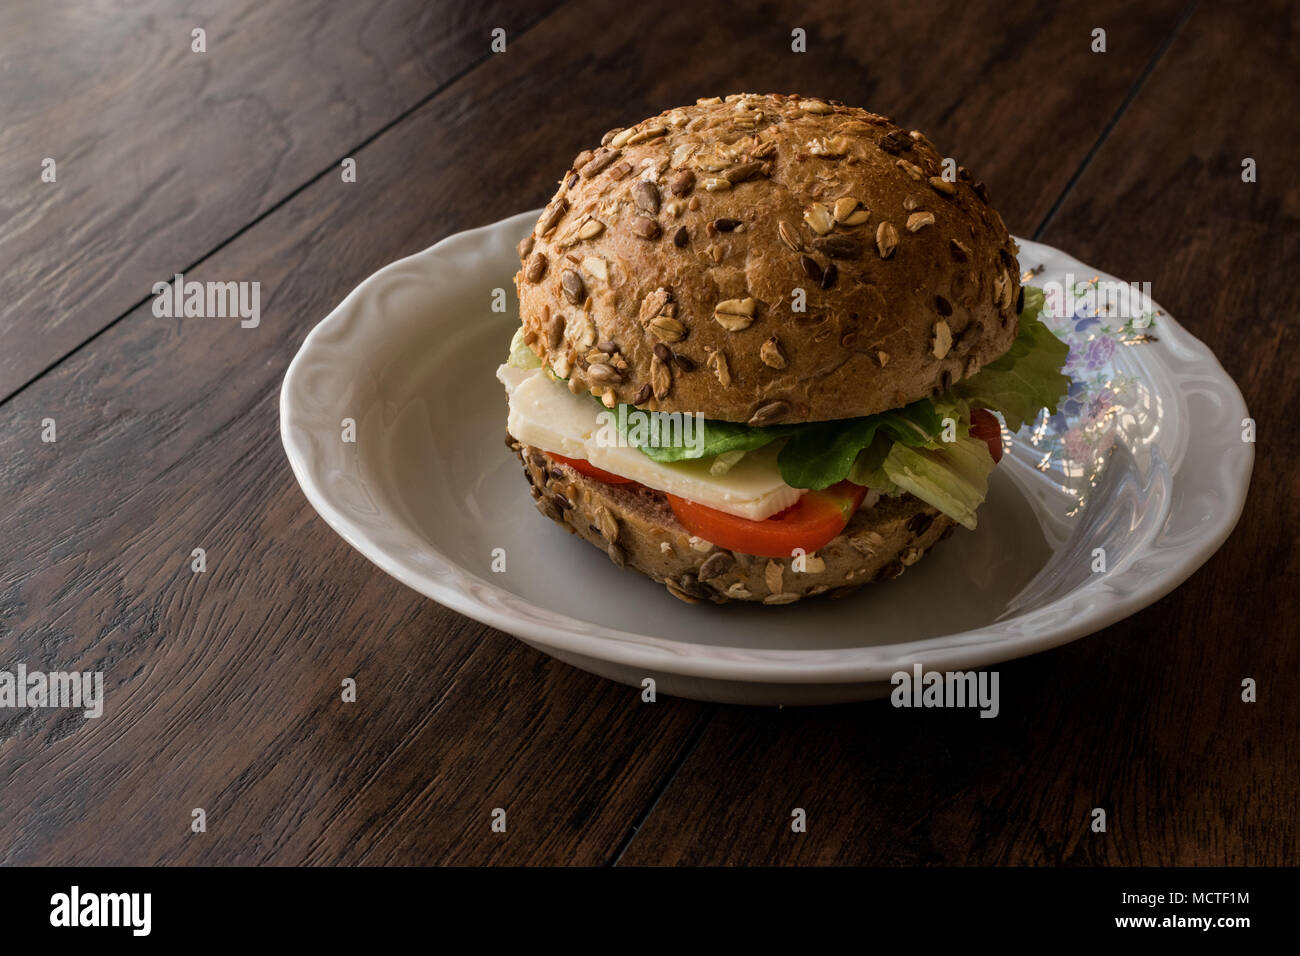 Healthy Sandwich with tomato and cheese in a mixed seeds bread on a wooden surface. Stock Photo